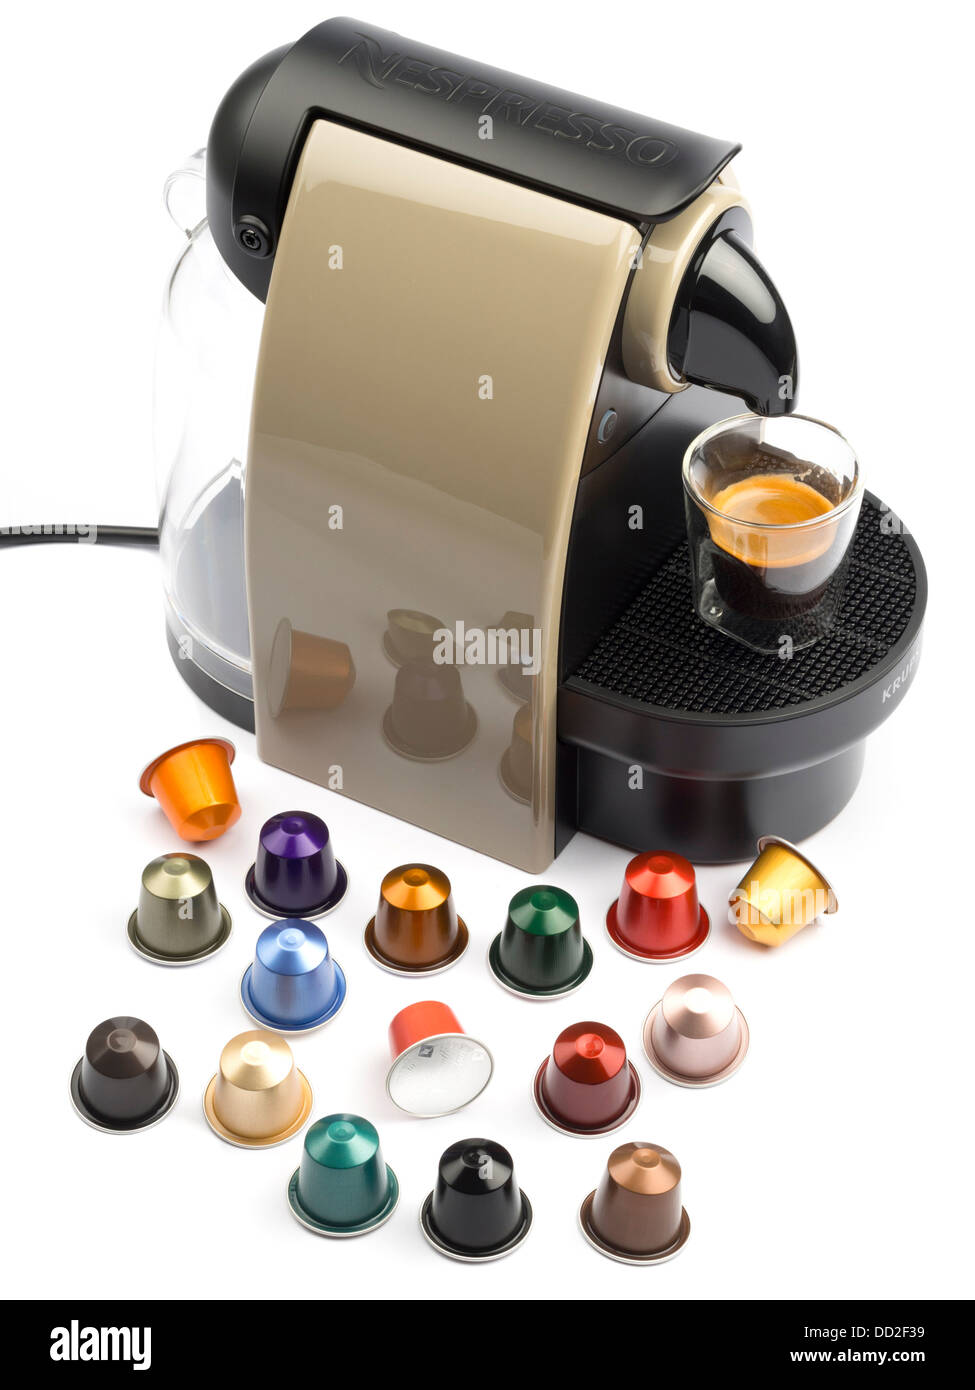 https://c8.alamy.com/comp/DD2F39/nespresso-coffee-machine-with-various-capsules-cut-out-isolated-on-DD2F39.jpg